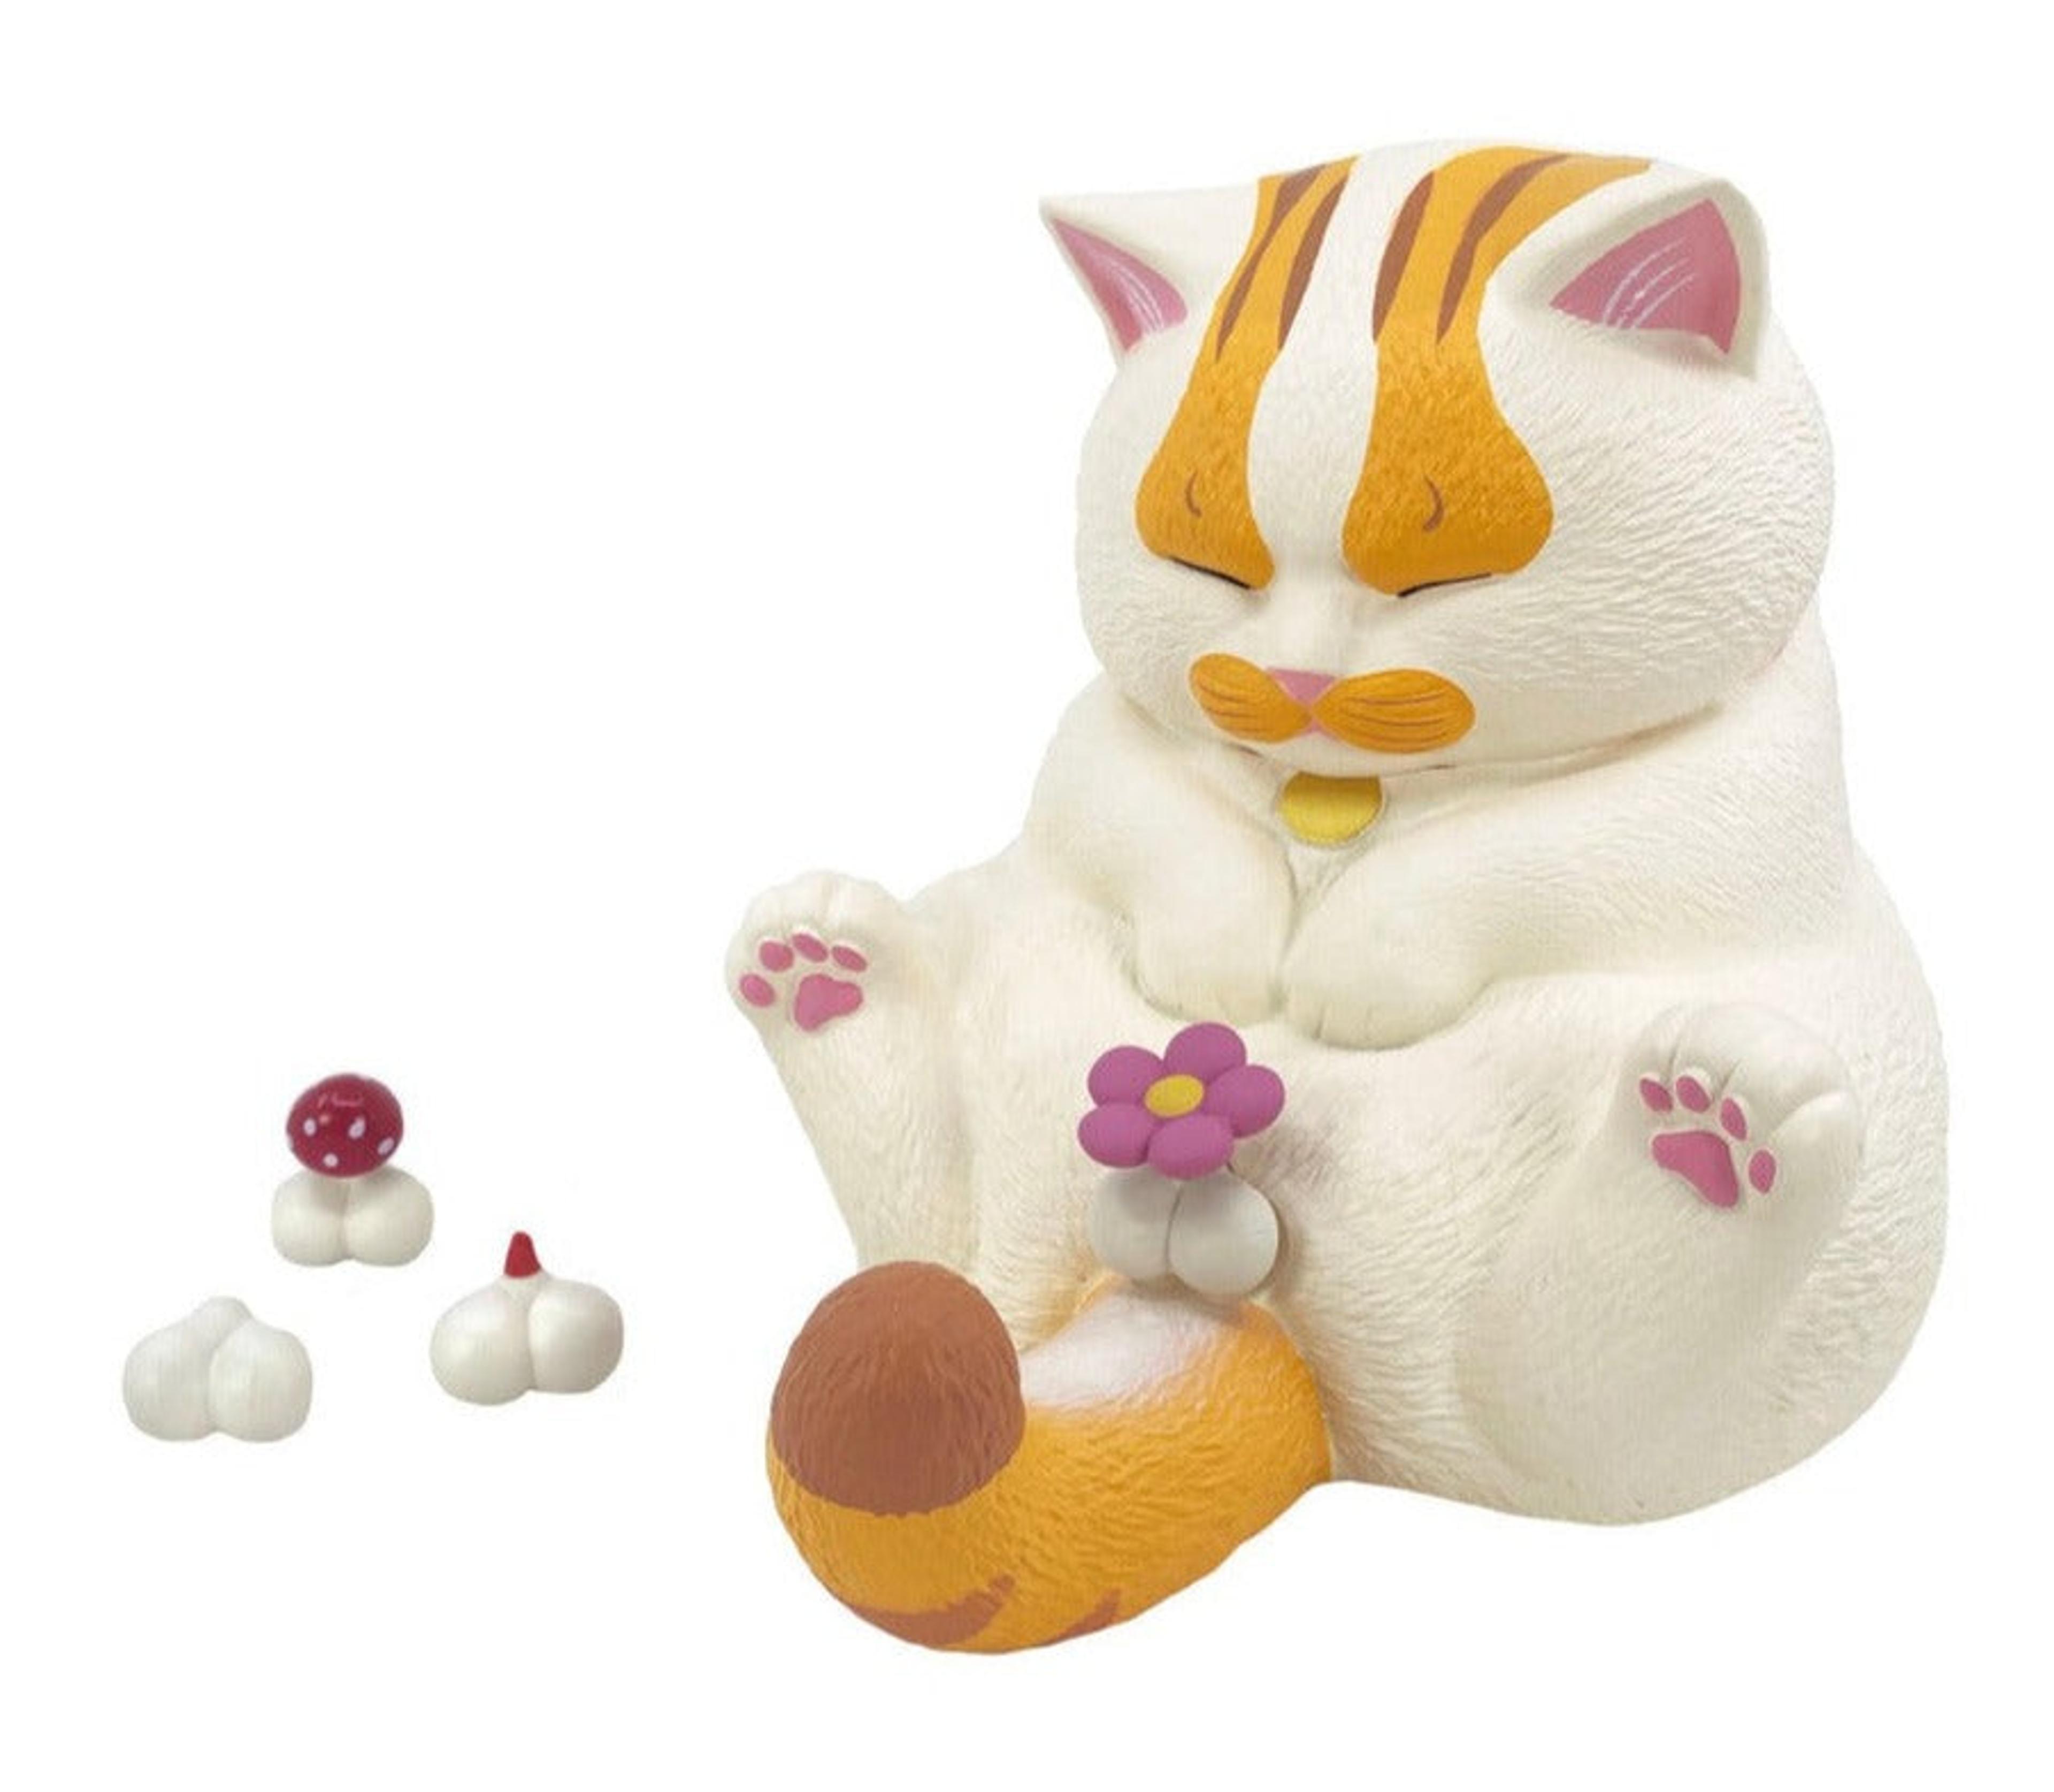 Year End Sale Crotch Staring Cat Vinyl Figure (Orange and White 